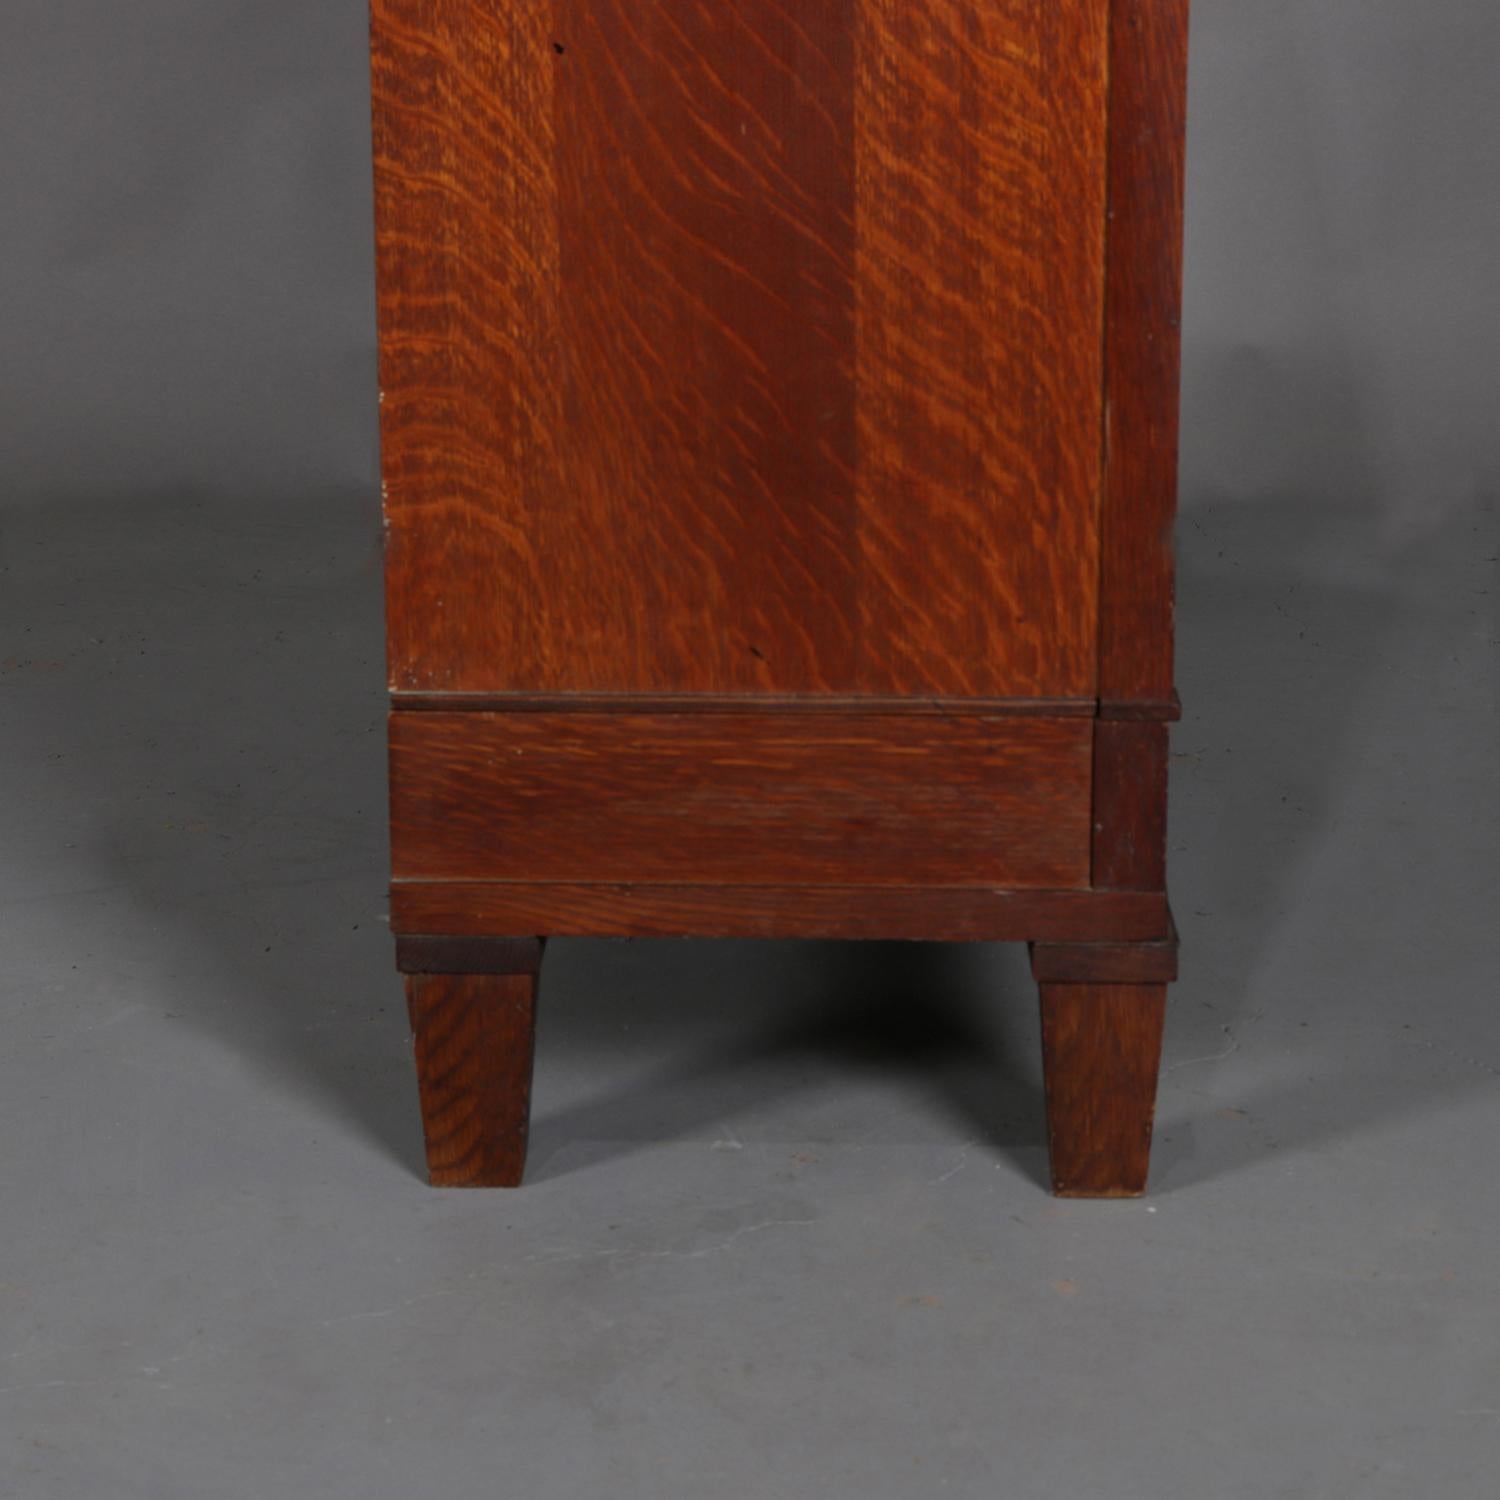 Carved Arts & Crafts Mission Oak Three-Stack Barrister Bookcase by Macey, circa 1910